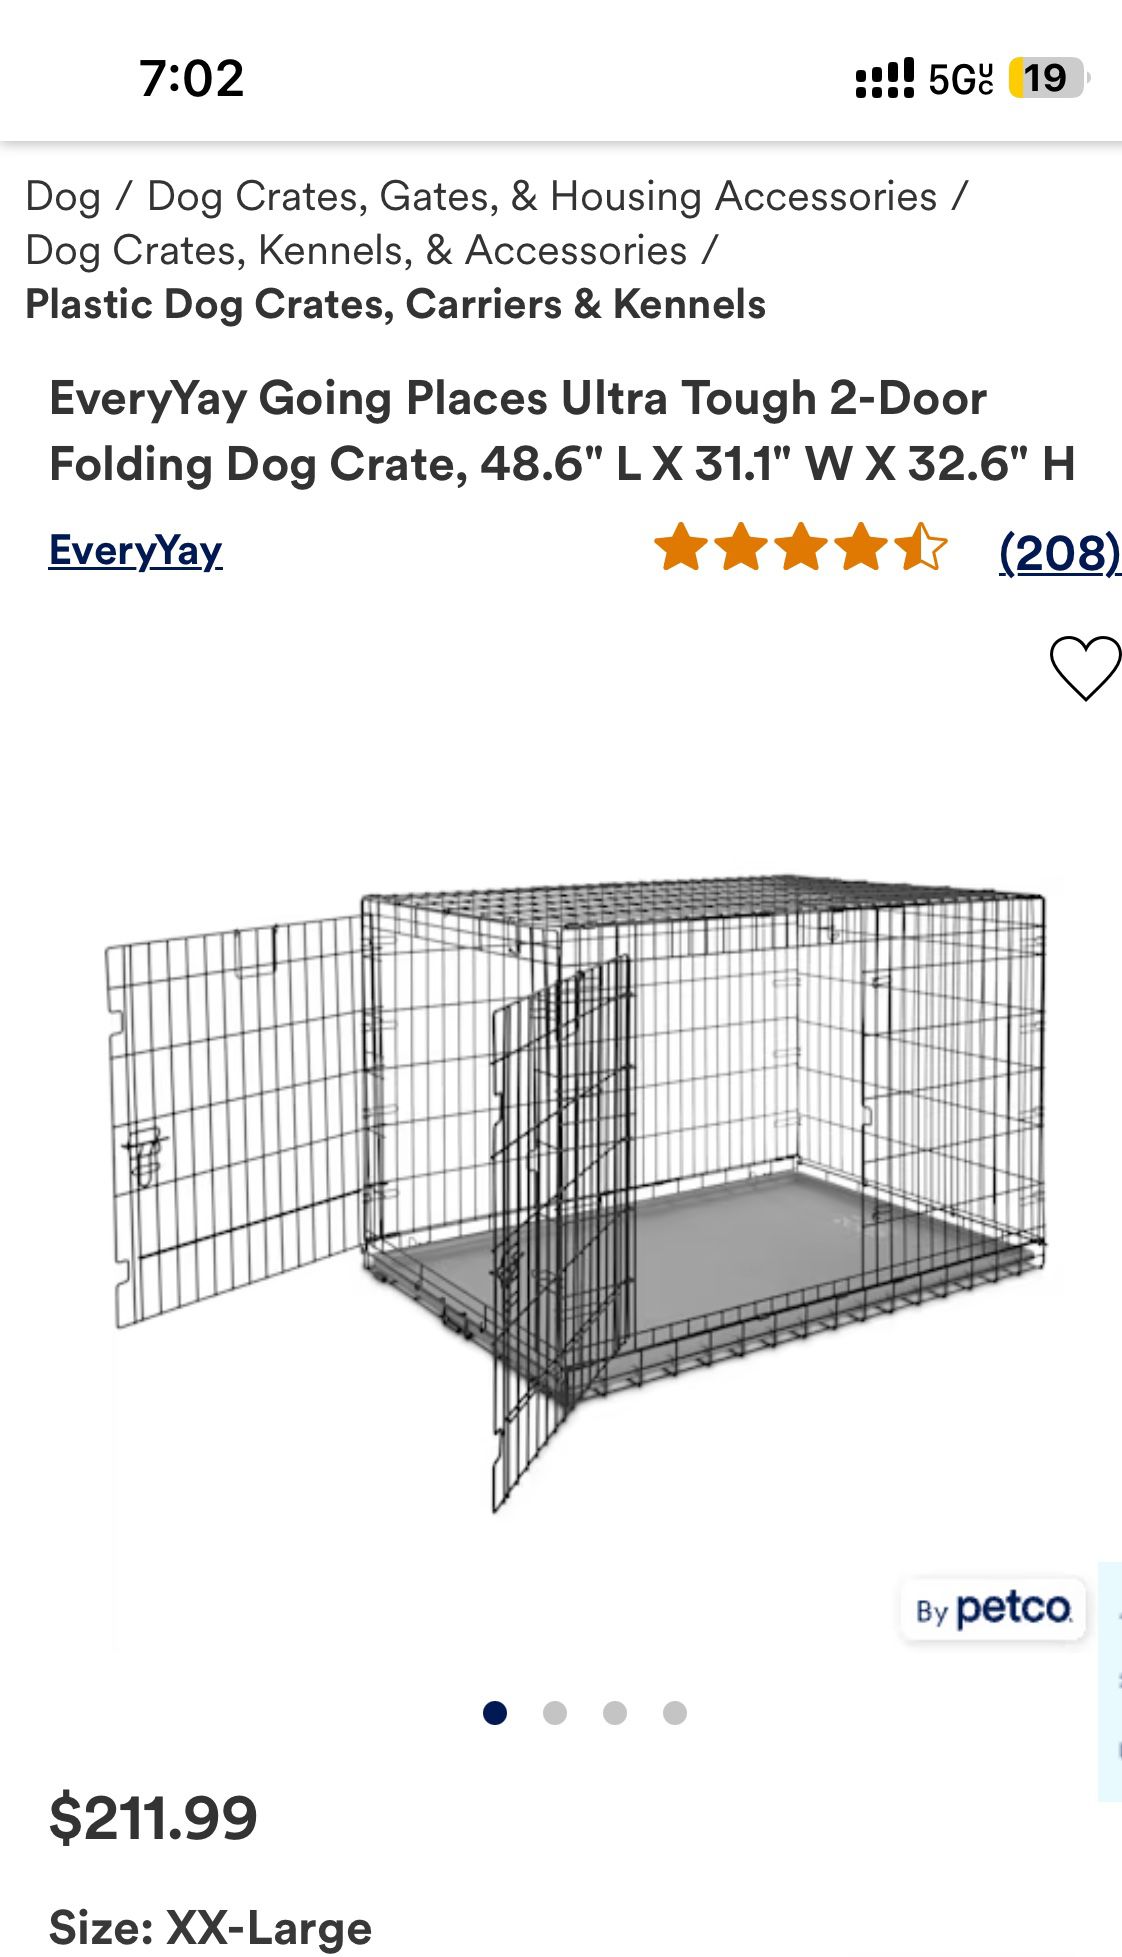 Every Yay dog crate XXL